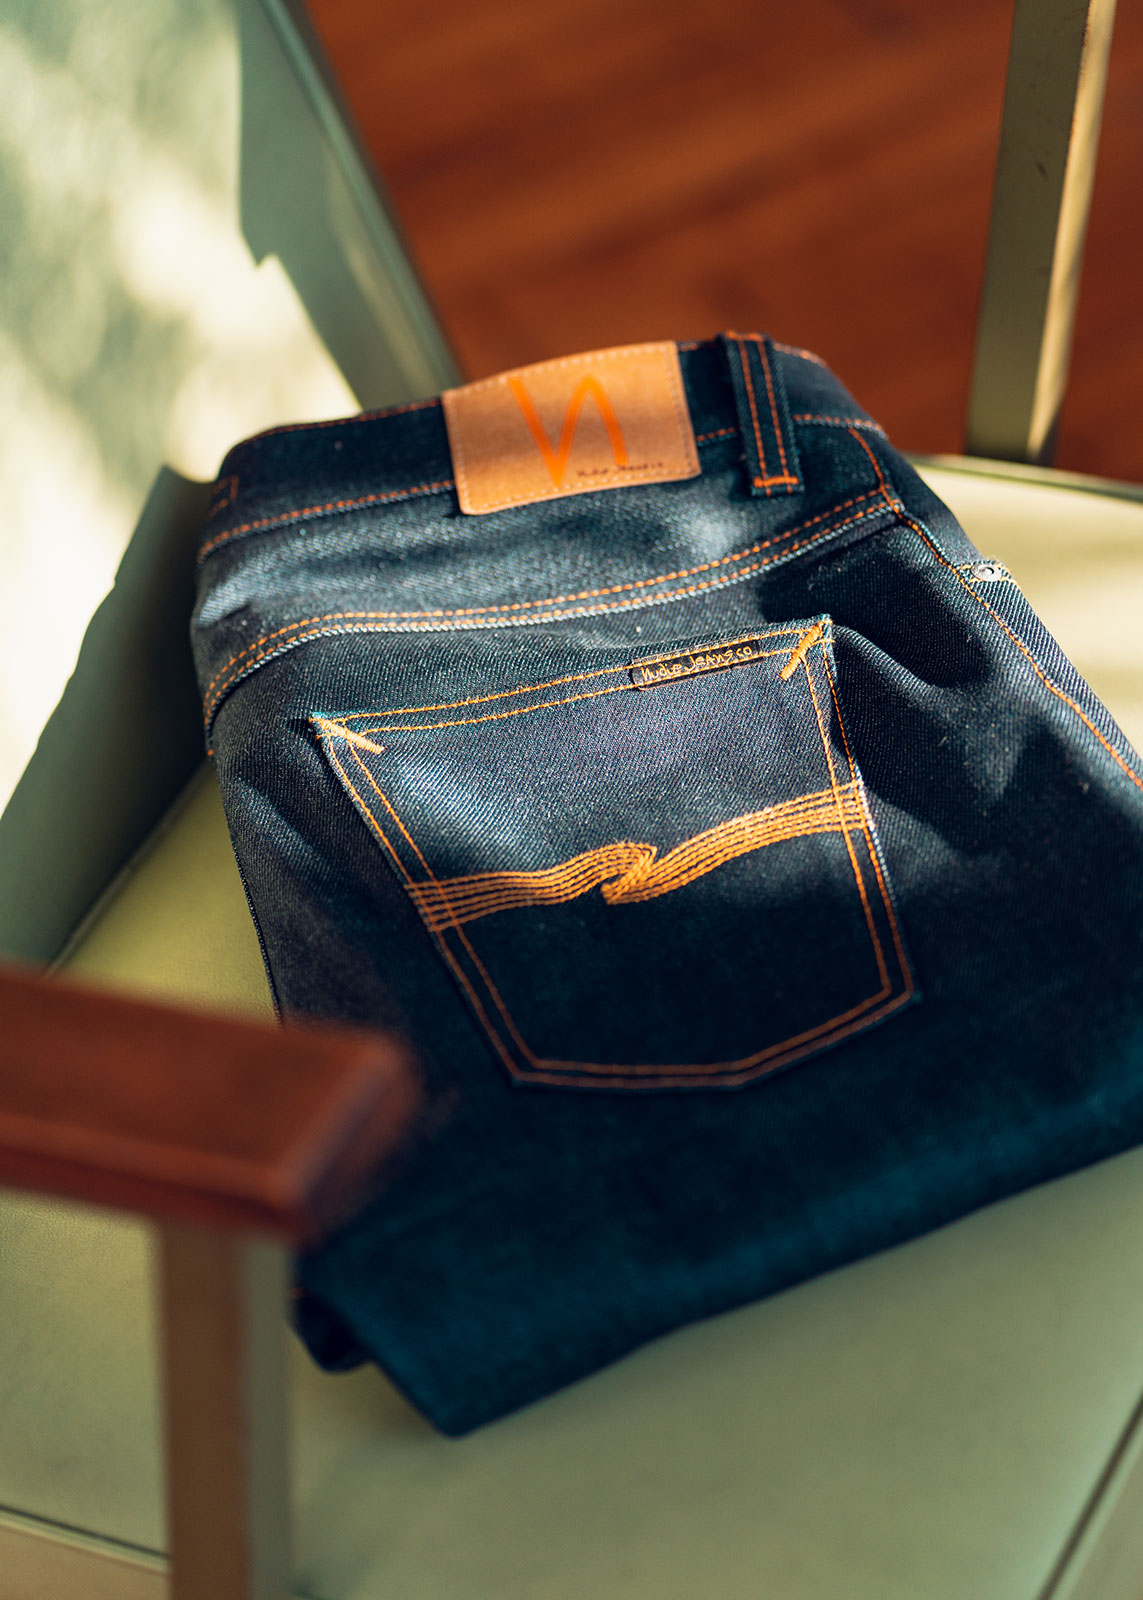 Nudie Lean Dean Dry Japan Selvage Review — Moto Zuc - Motorcycles and